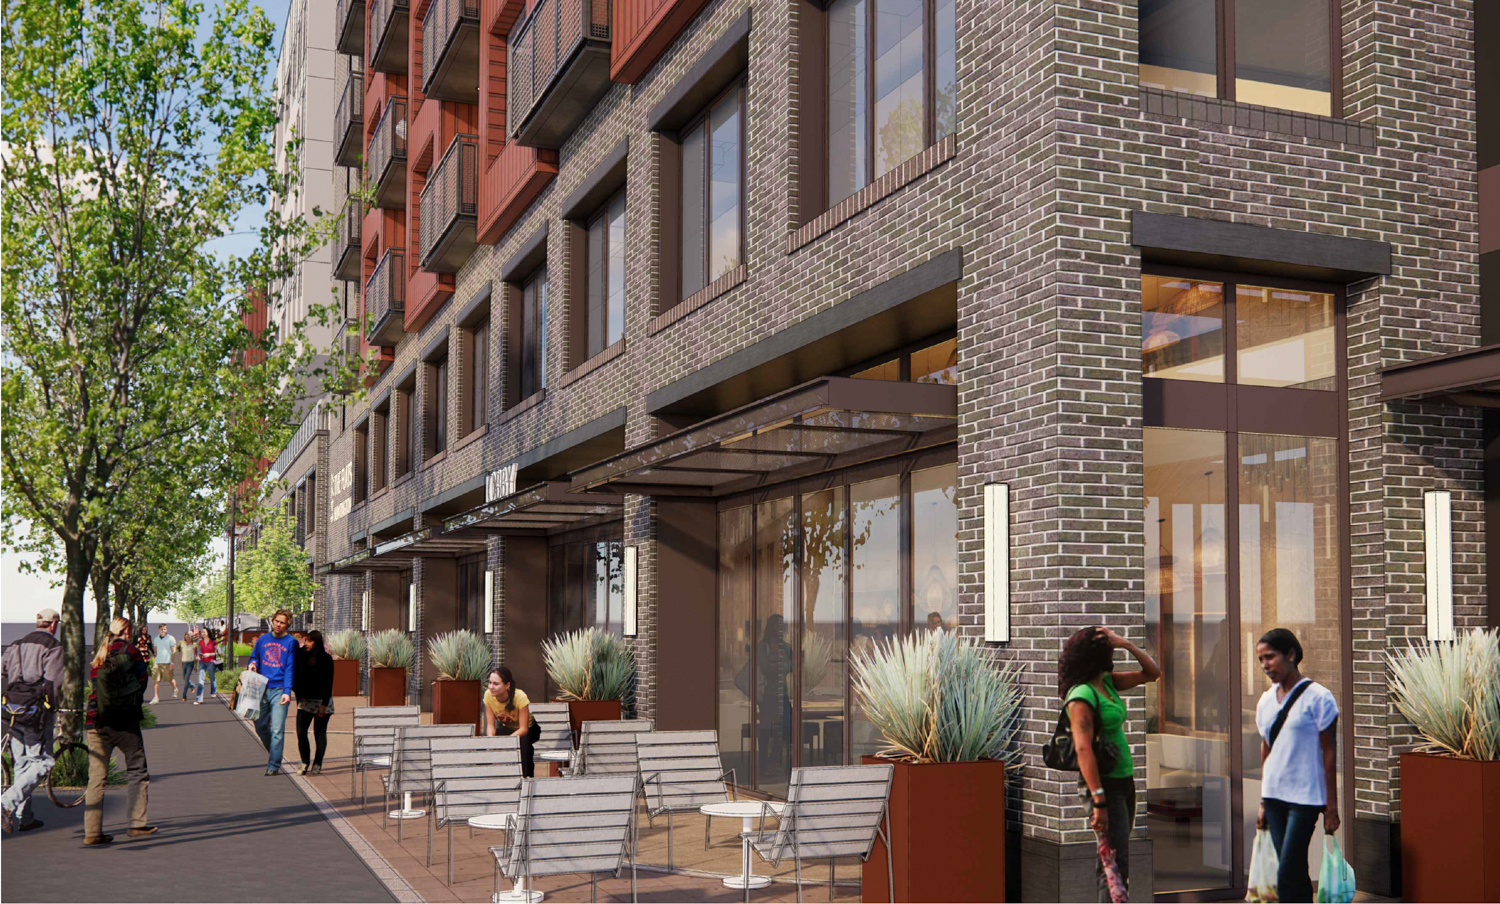 1477 Huntington Avenue view of street activity along Huntington, rendering by KTGY Architecture + Planning